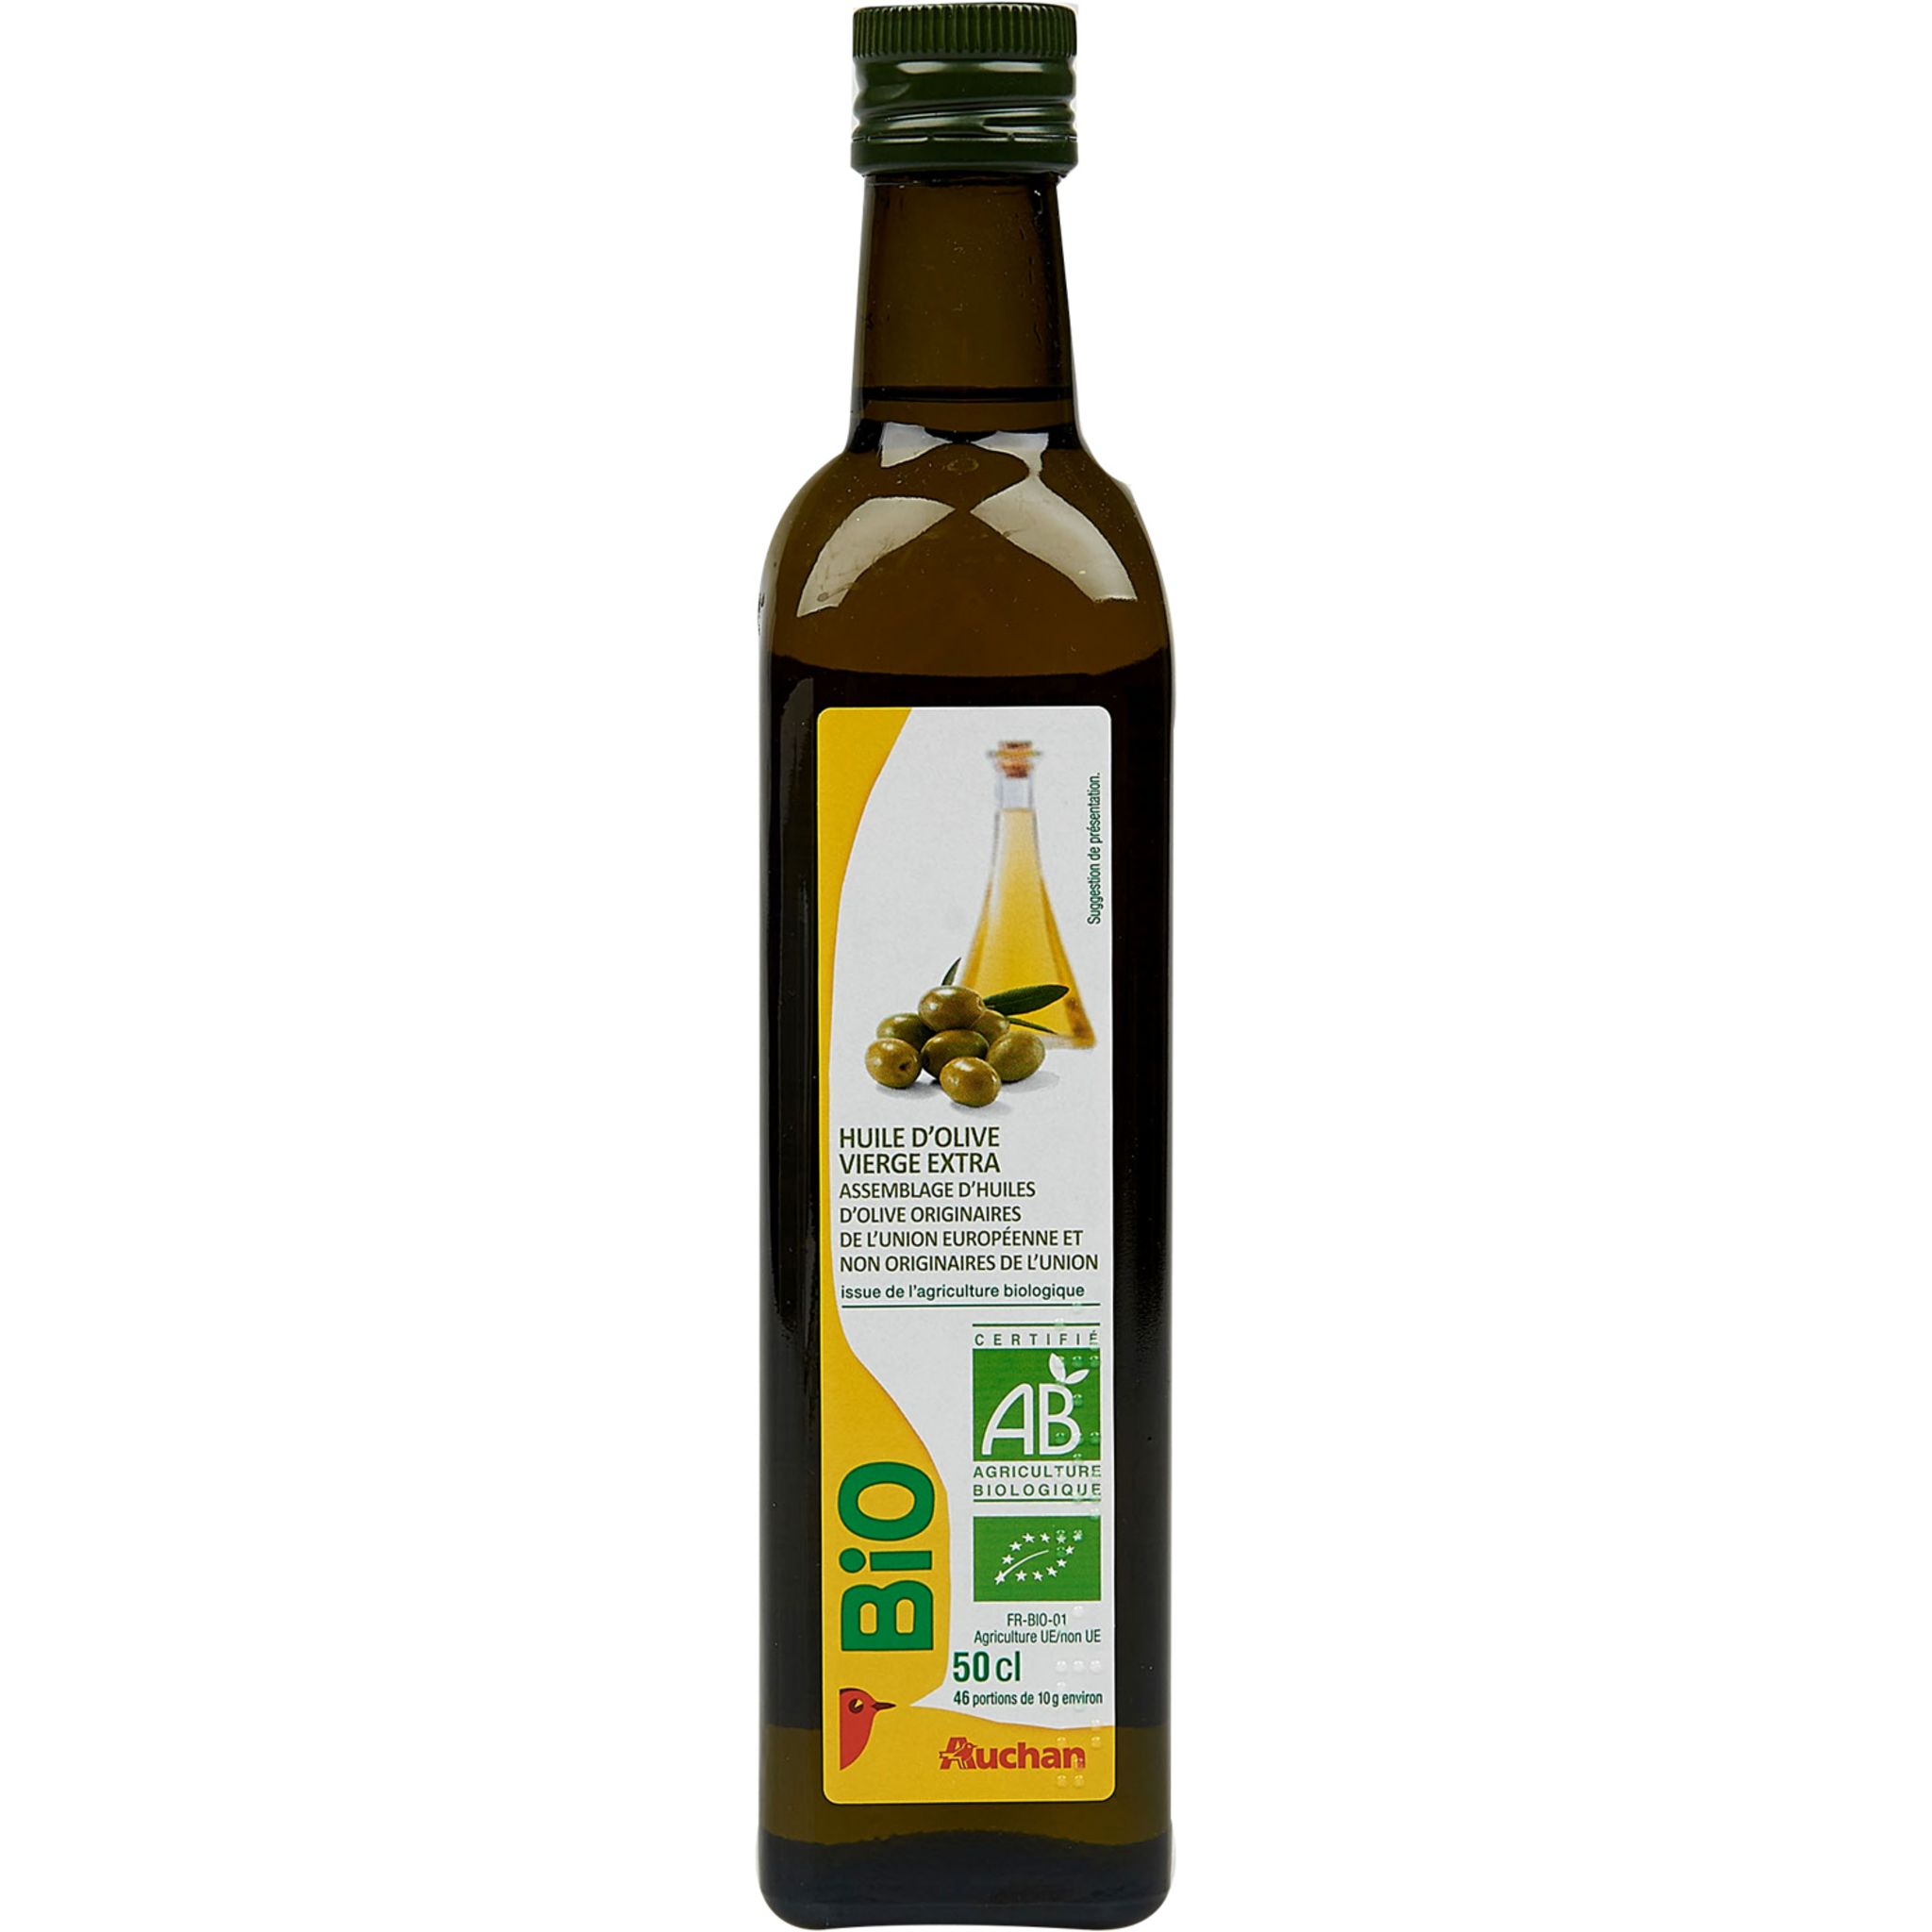 AUCHAN MMM! Huile d'olive vierge extra en spray 25cl pas cher 